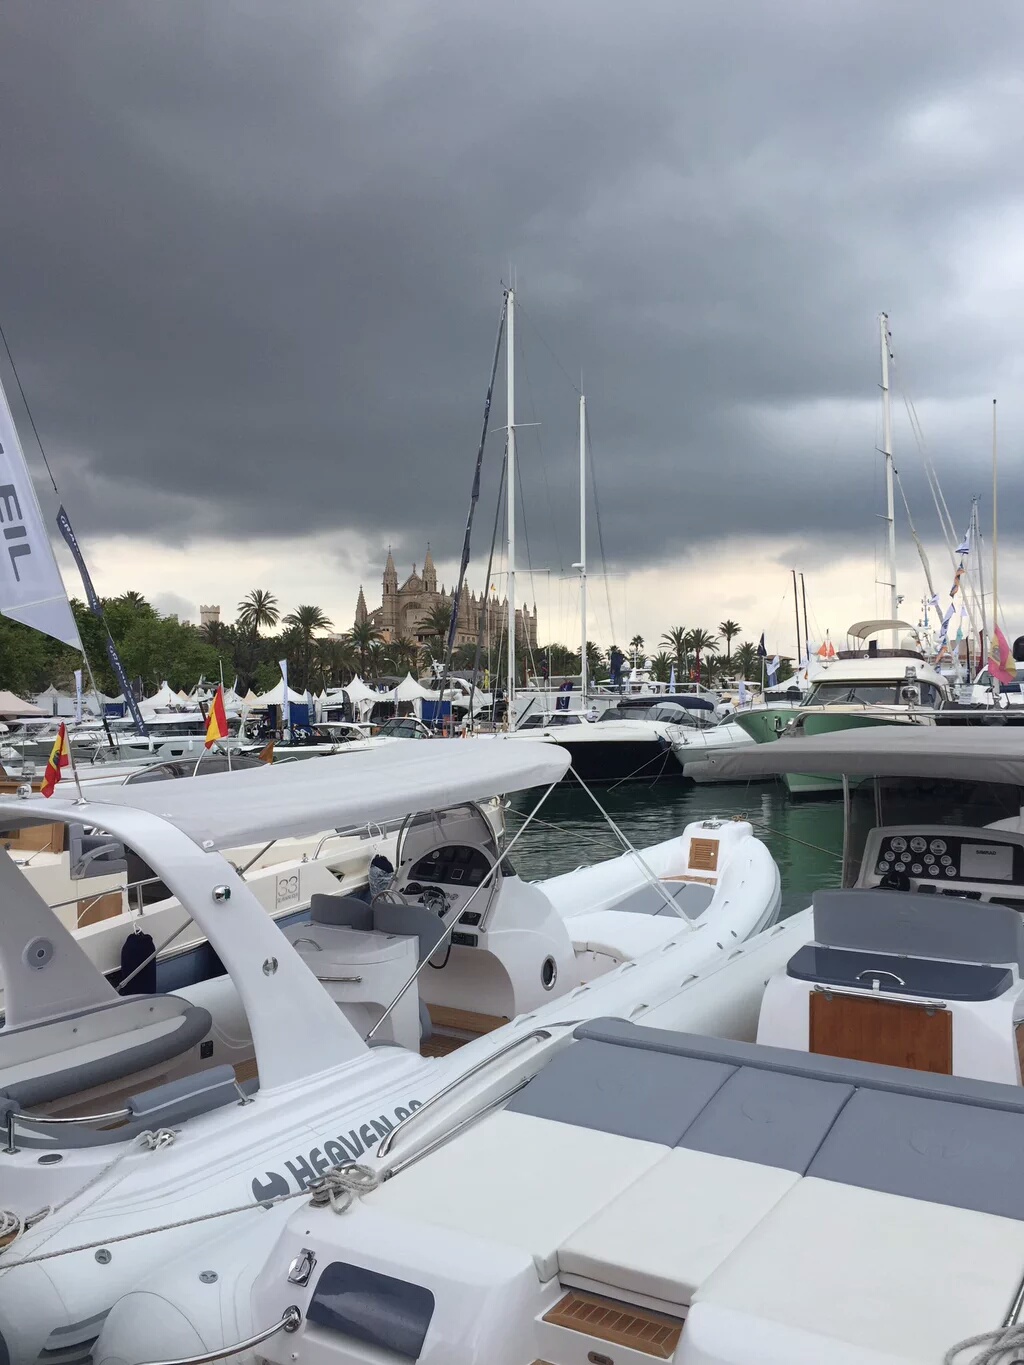 Palma's Port will host the XXXIII edition of the International Boat Show 